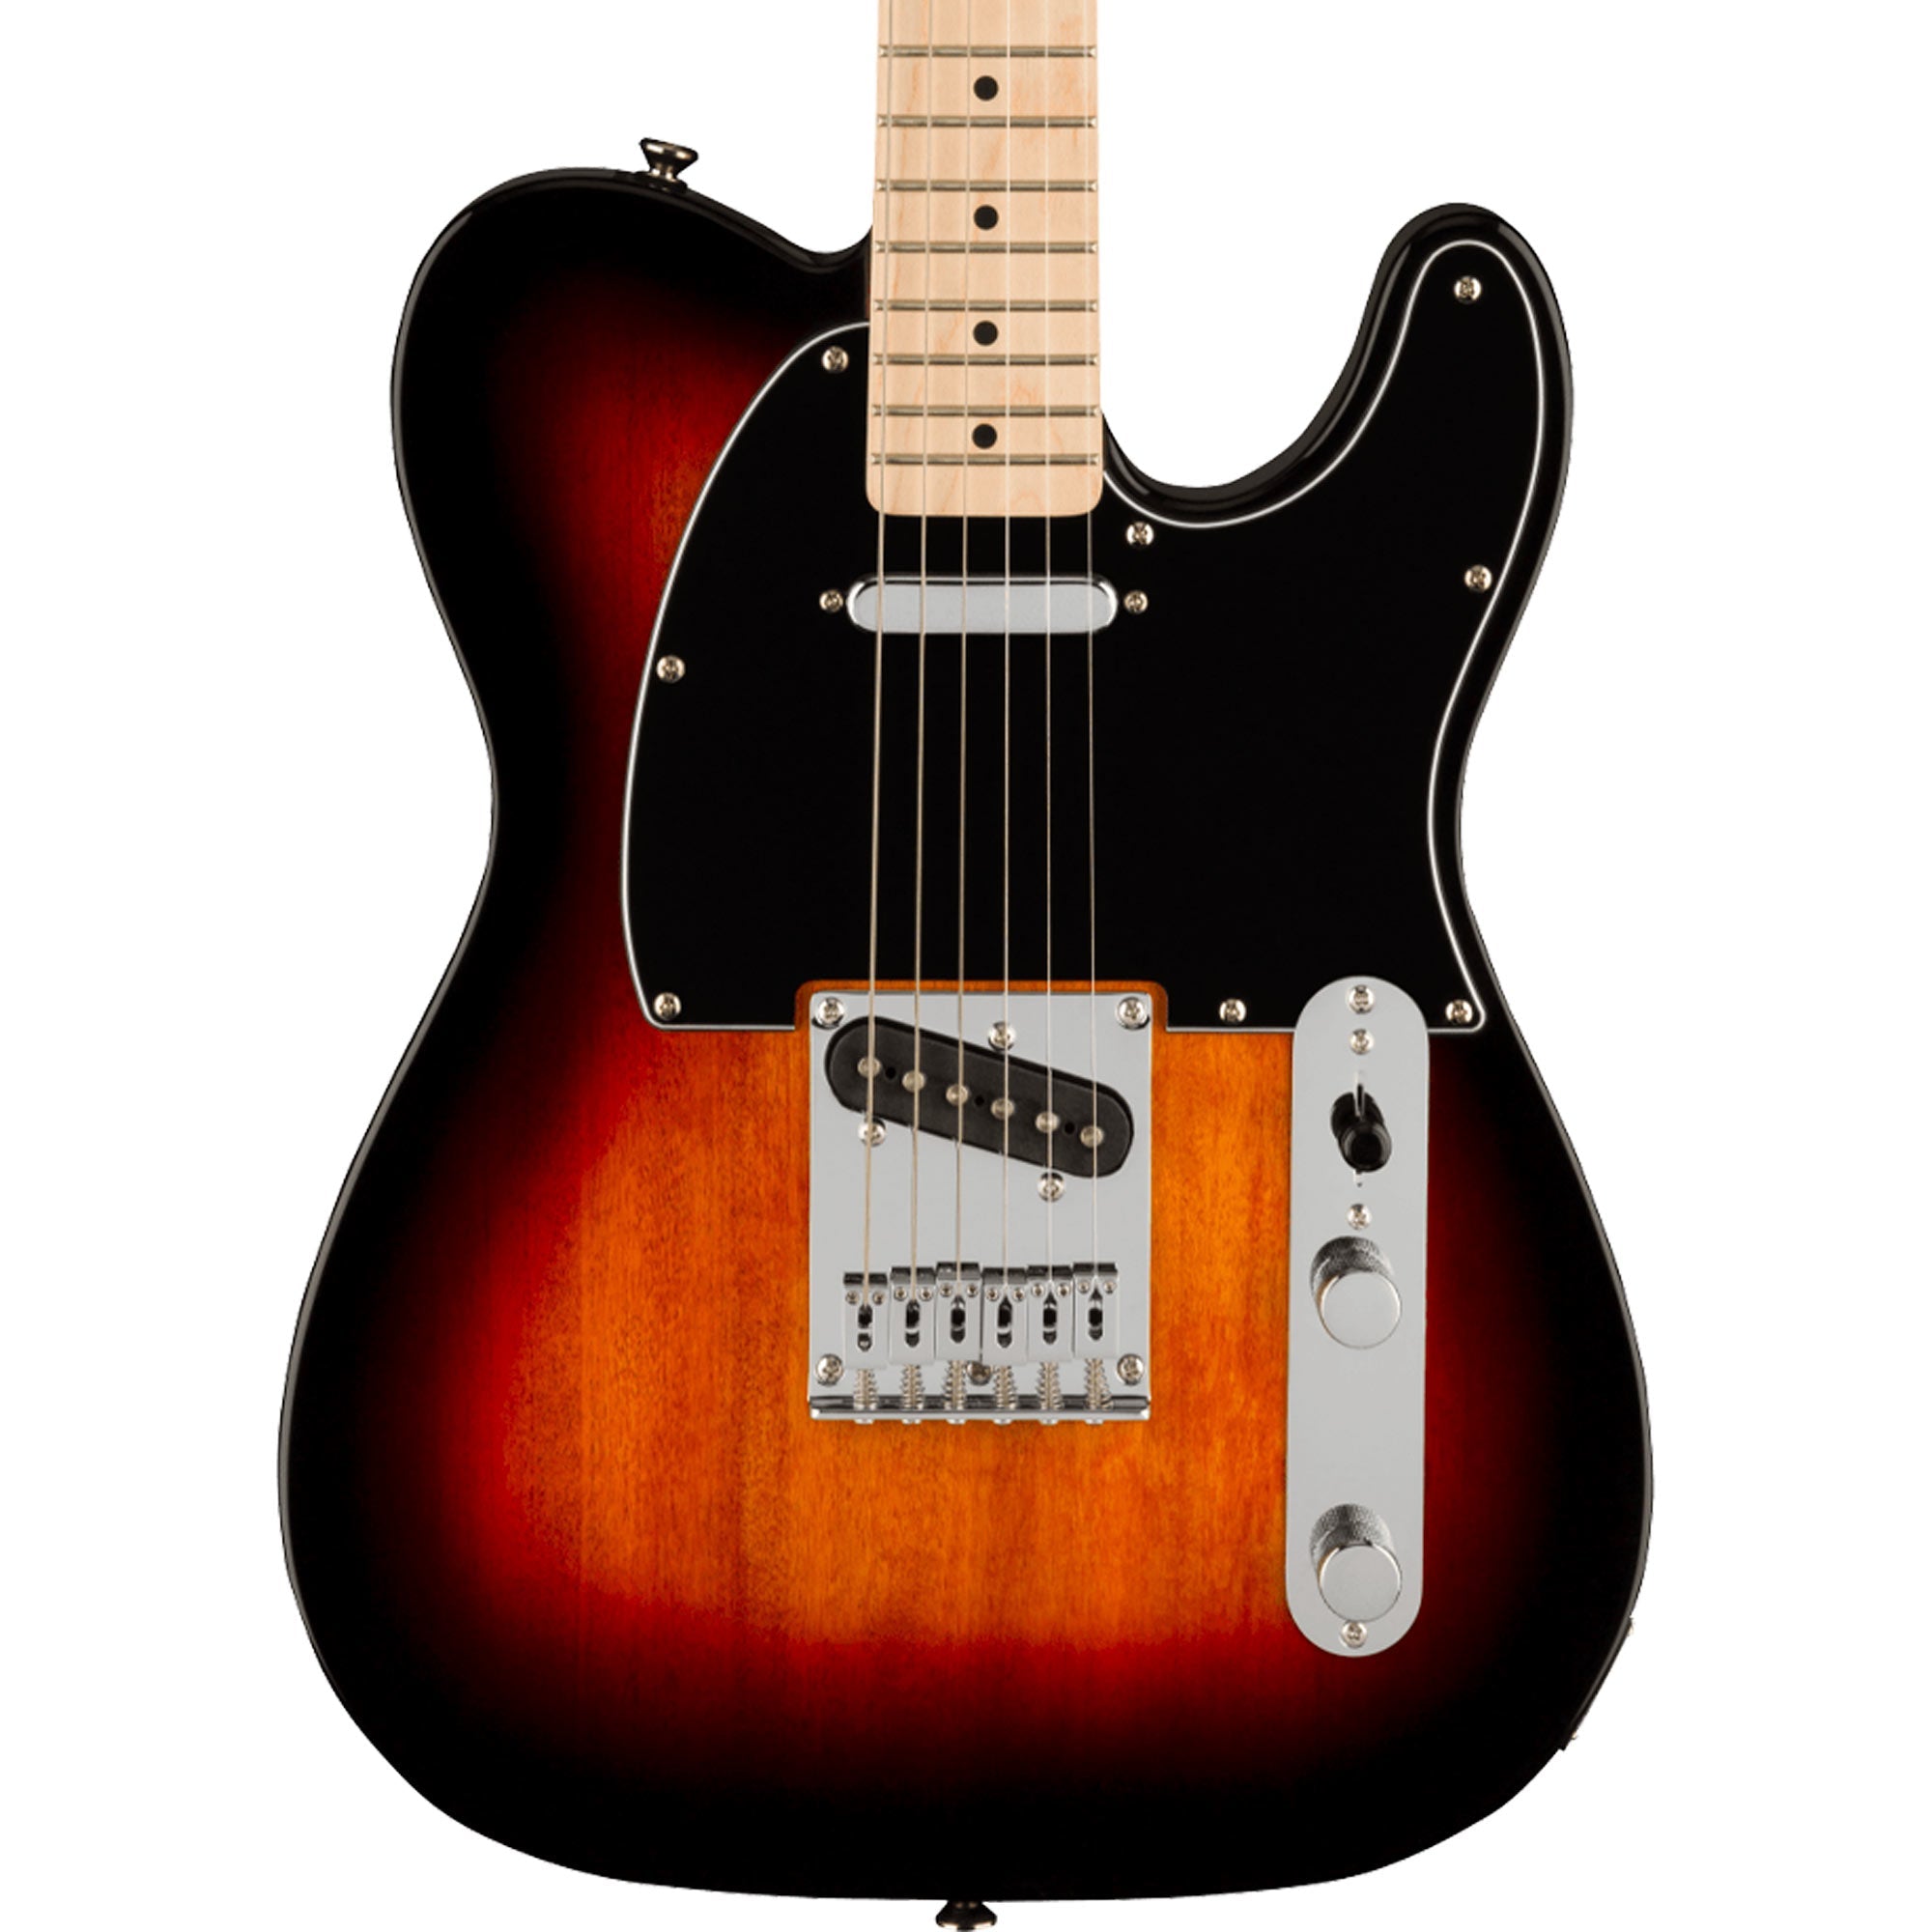 Squier Affinity Series Telecaster 3-Color Sunburst | The Music Zoo